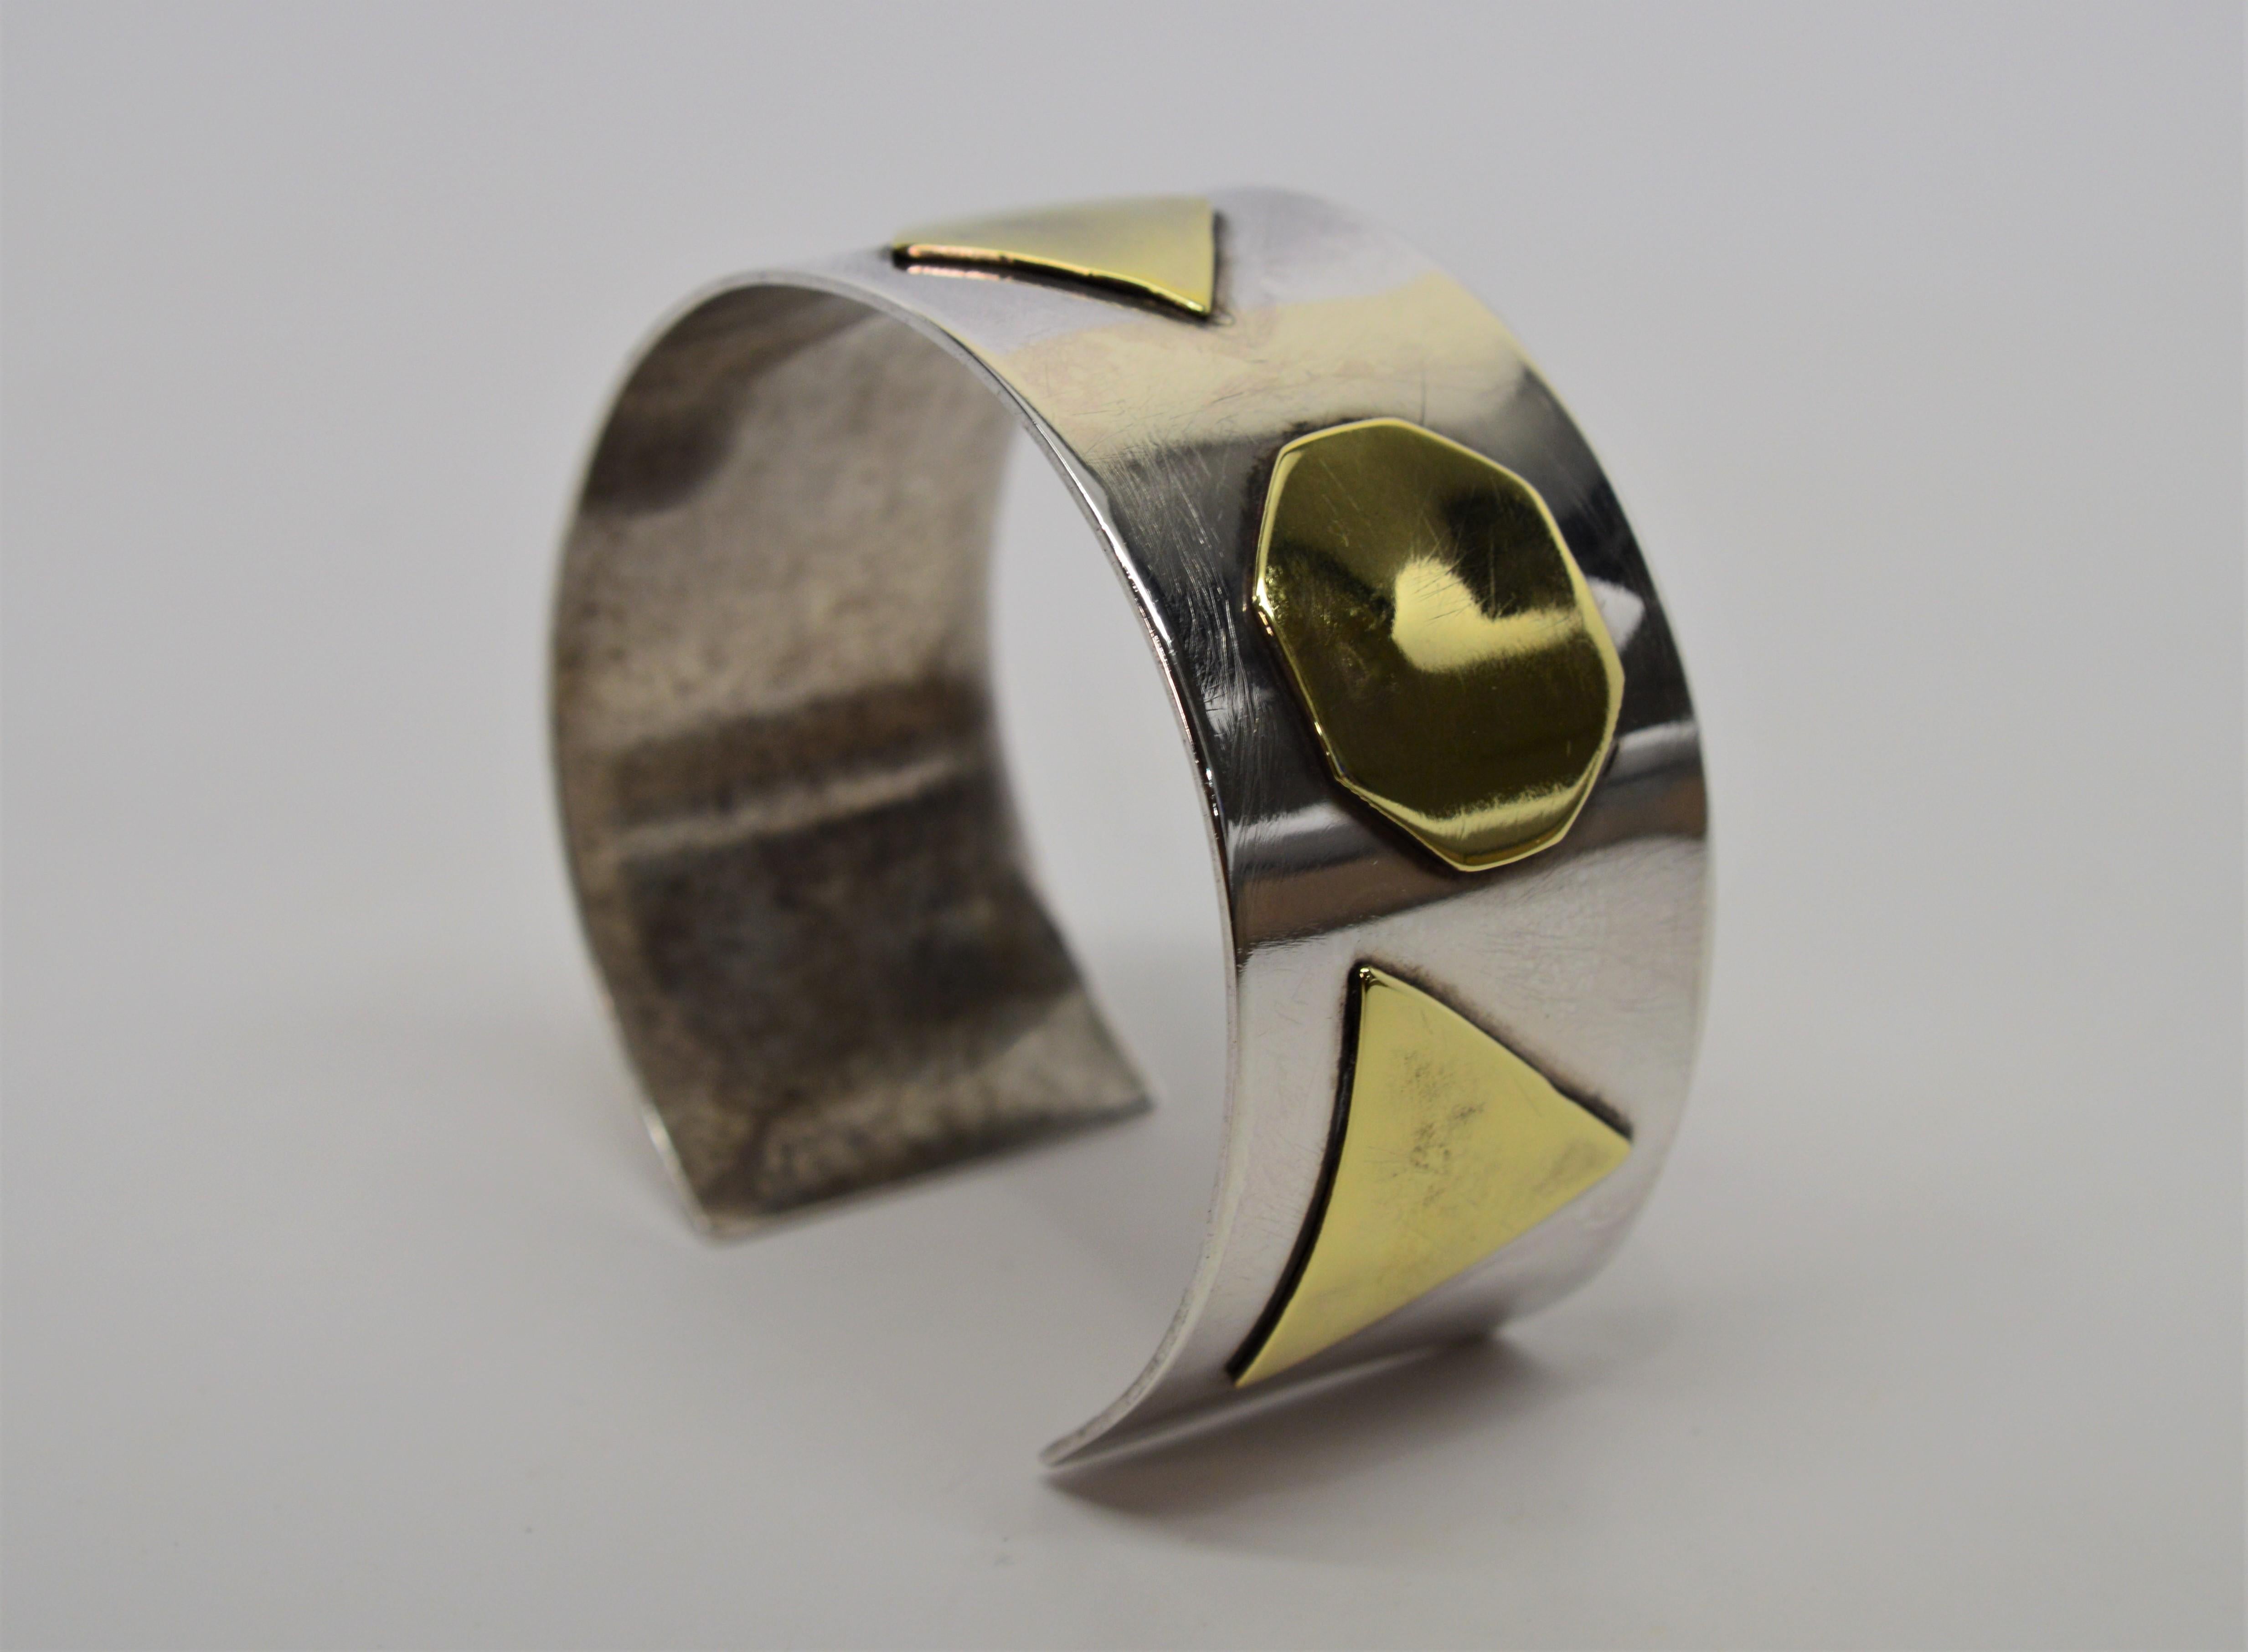 A fabulous artisan style piece, this cuff bracelet is made of .925 Sterling Silver and has contrasting Brass geometric appliques that bestows character and style. The mix metals cuff measures 2-1/4 inch by 2 inches and has an inside circumference of